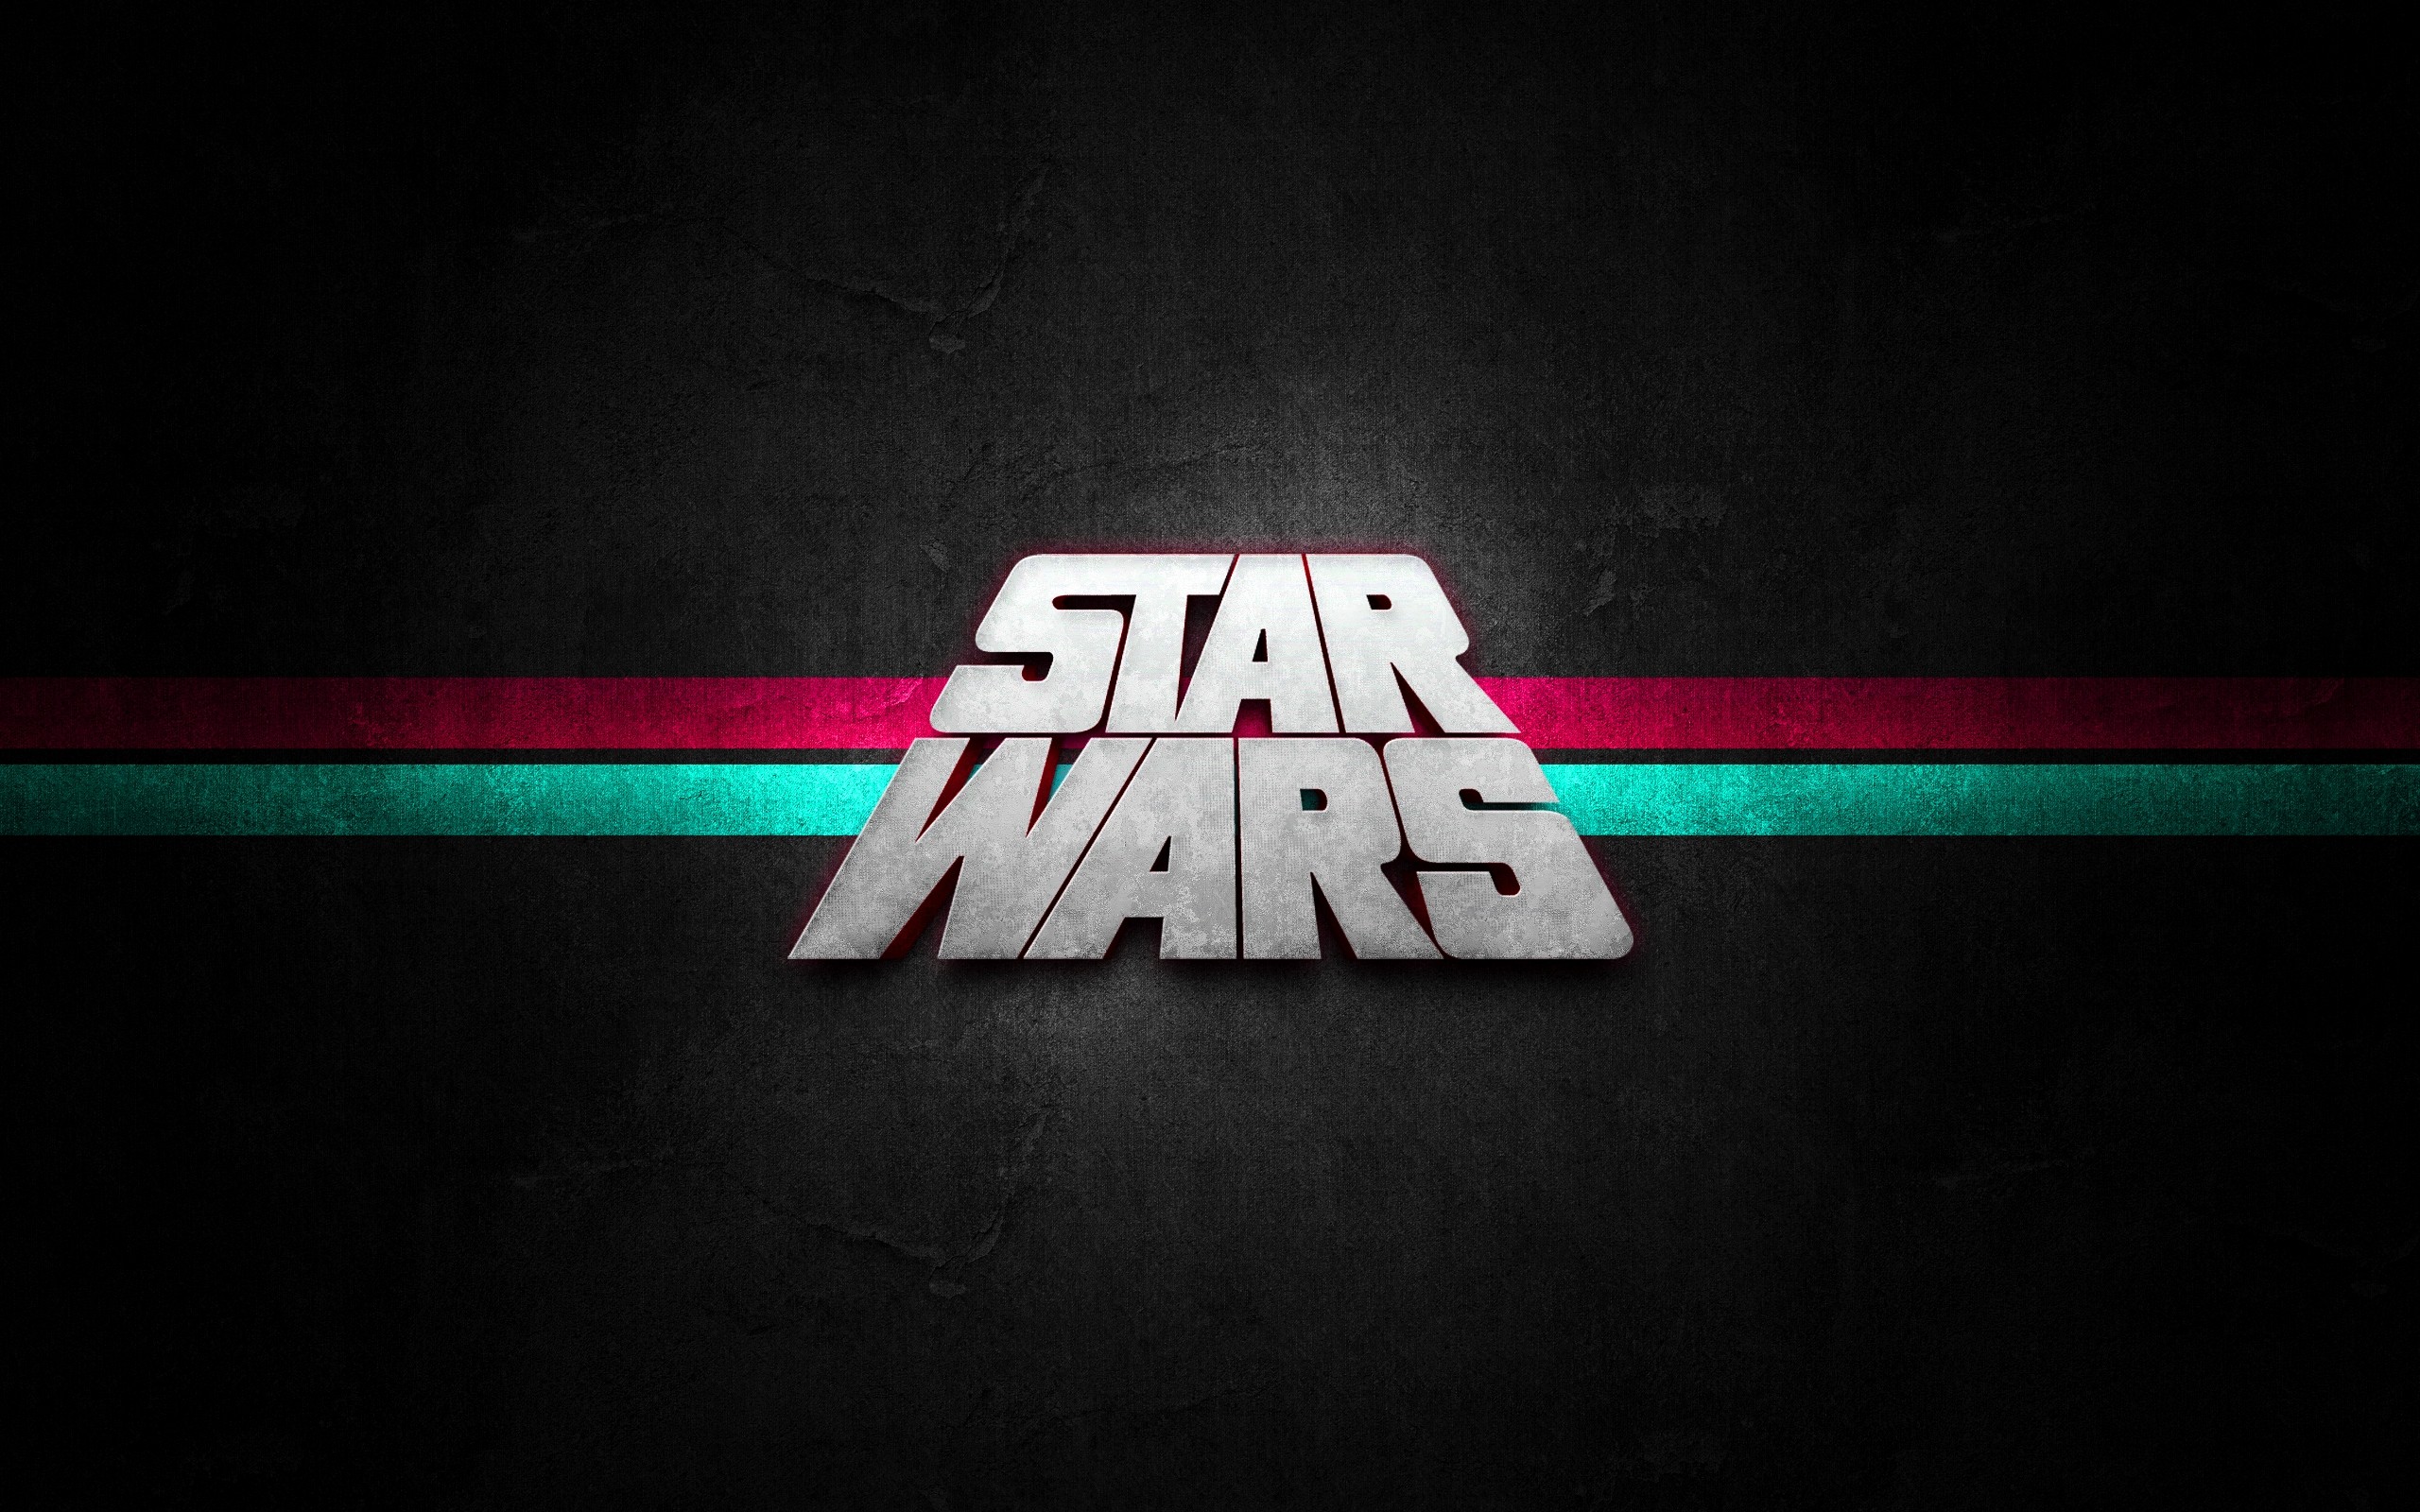 General 2560x1600 Star Wars minimalism logo science fiction lines red cyan black background simple background movies